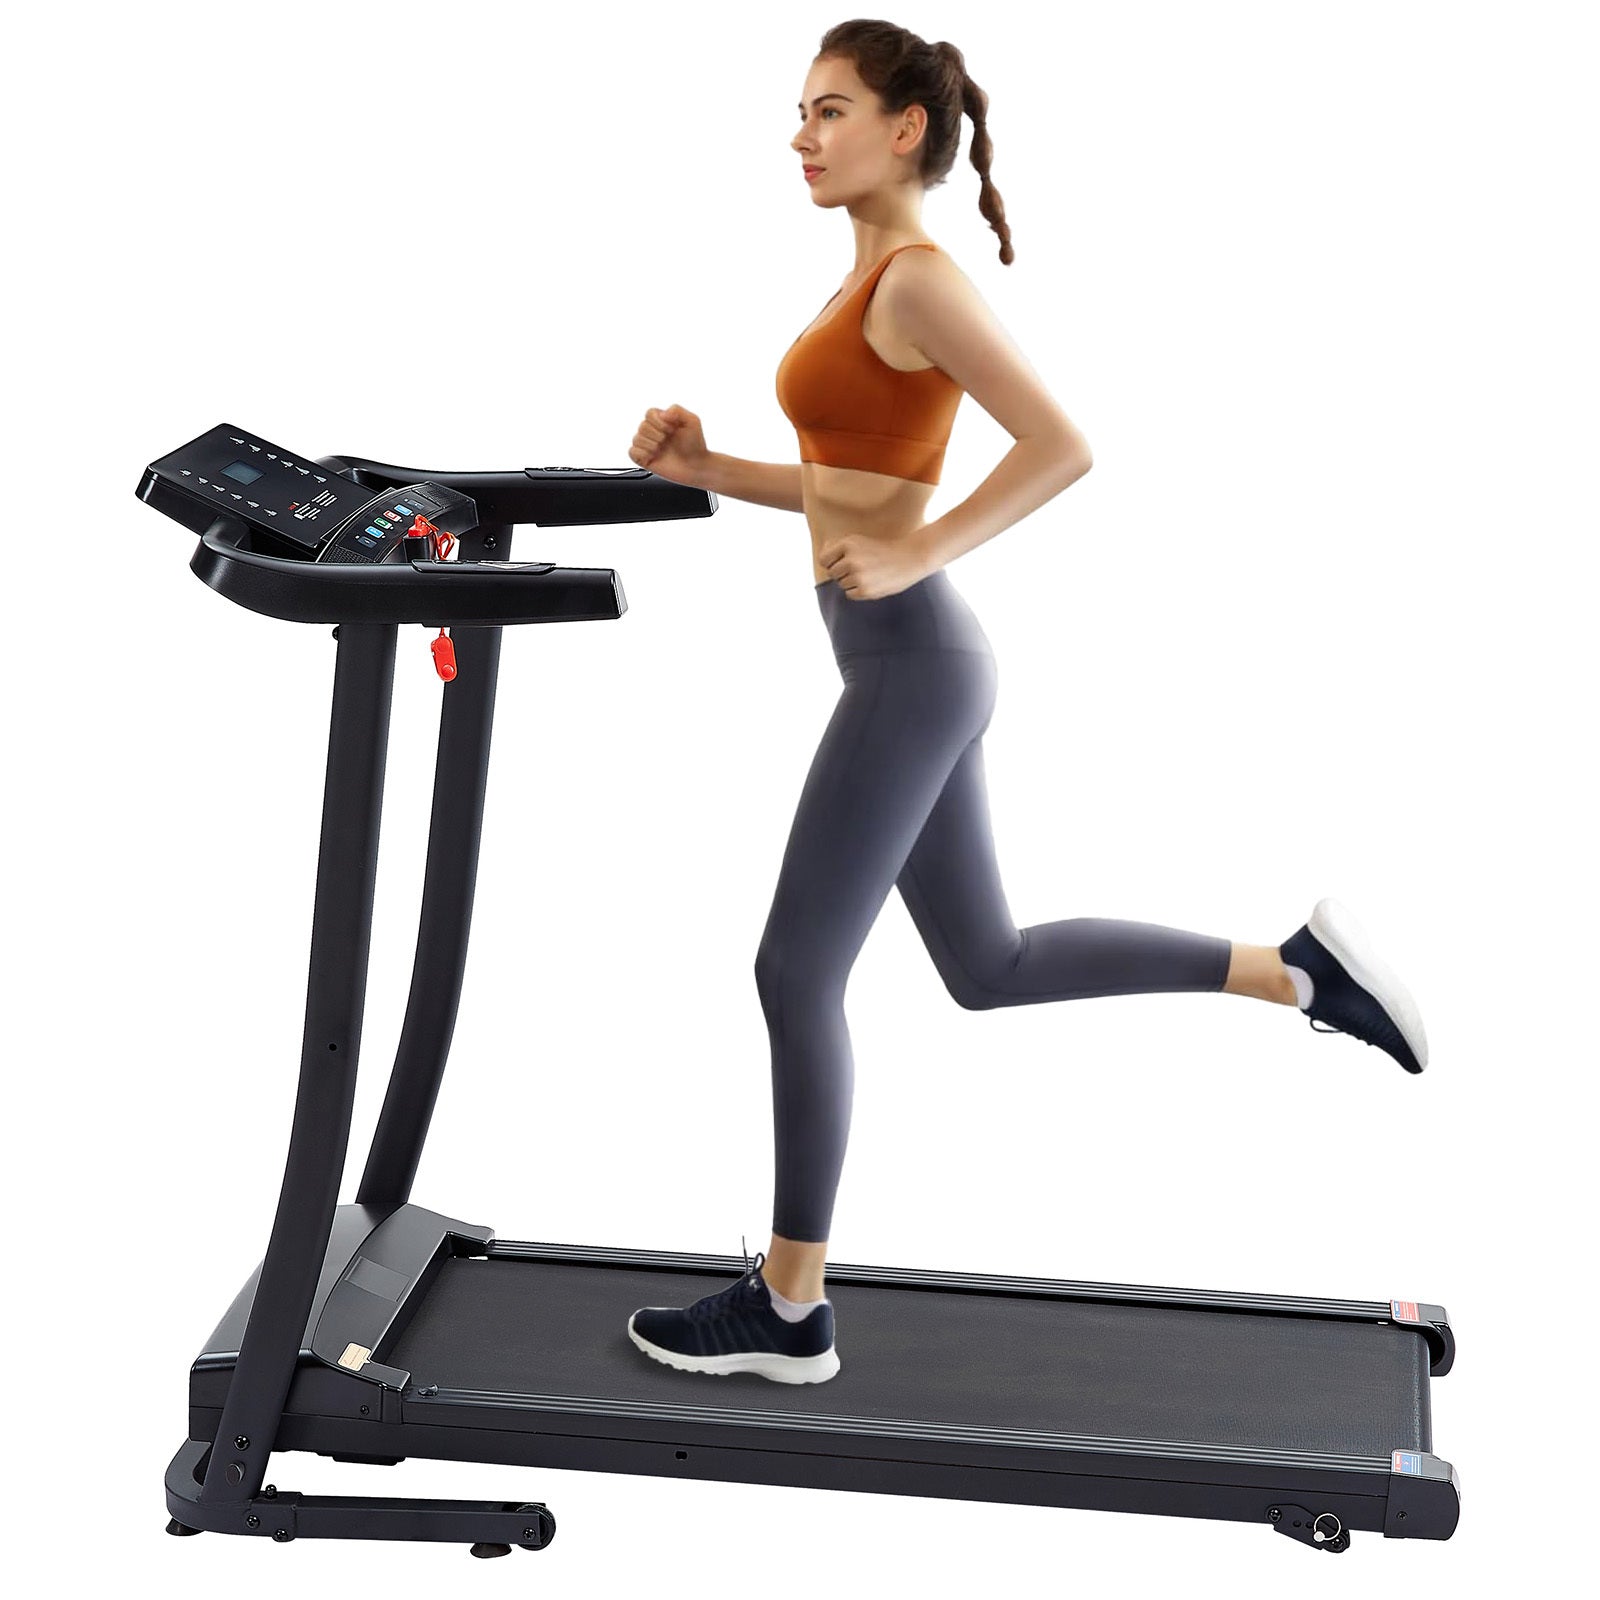 Treadmill-2.5-HP-folding-treadmill,-easy-to-move,-with-3-speed-incline-adjustment-and-12-preset-programs,-3-countdown-modes,-heart-rate,-Bluetooth,-etc.,-suitable-for-home-and-gym-use-